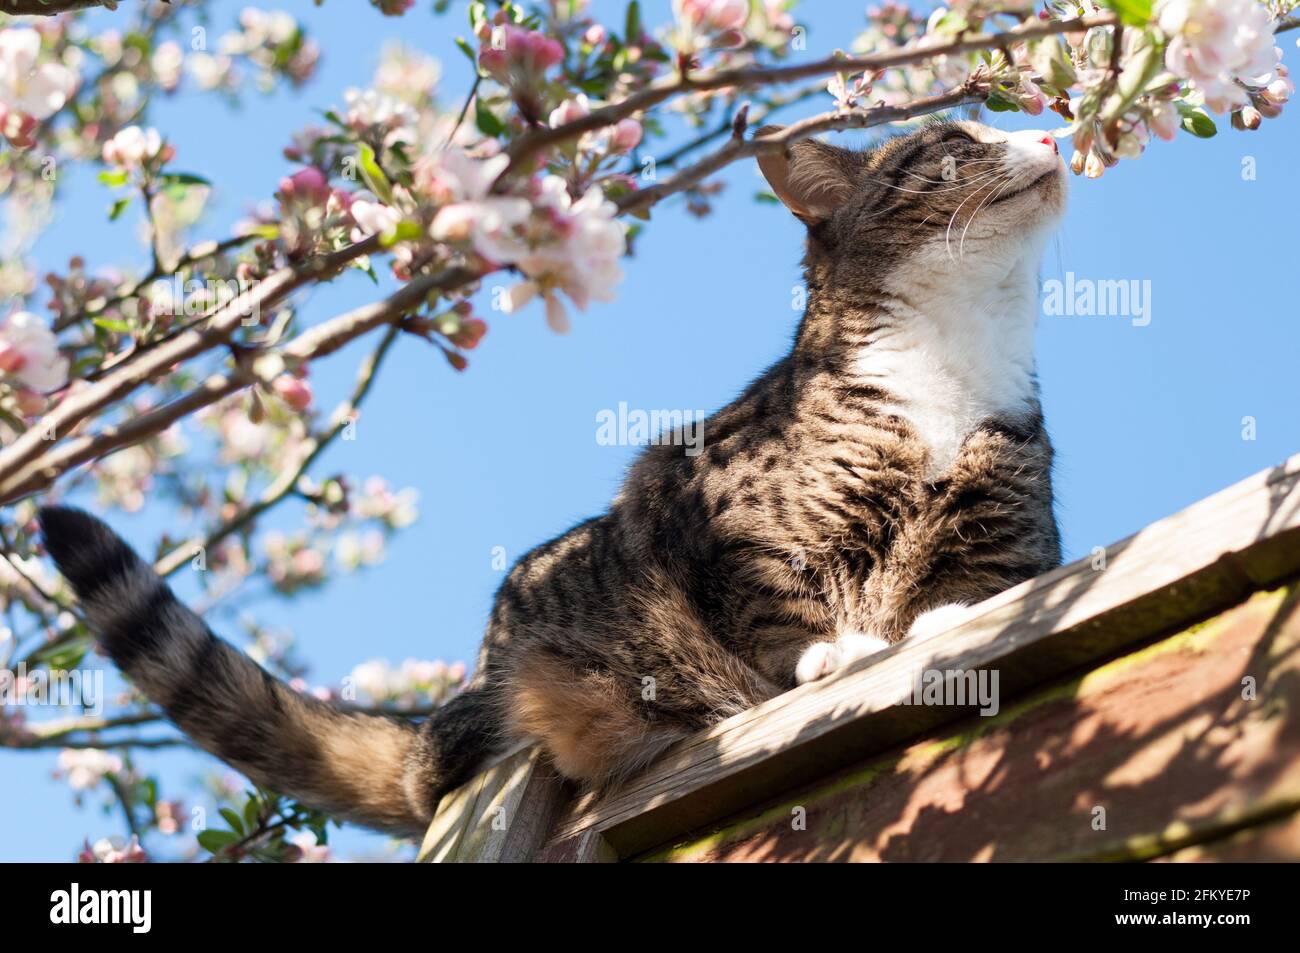 A female short-haired tabby cat (Felis catus) sitting on a wooden fence next to a blossoming apple tree (Malus domestica) Stock Photo